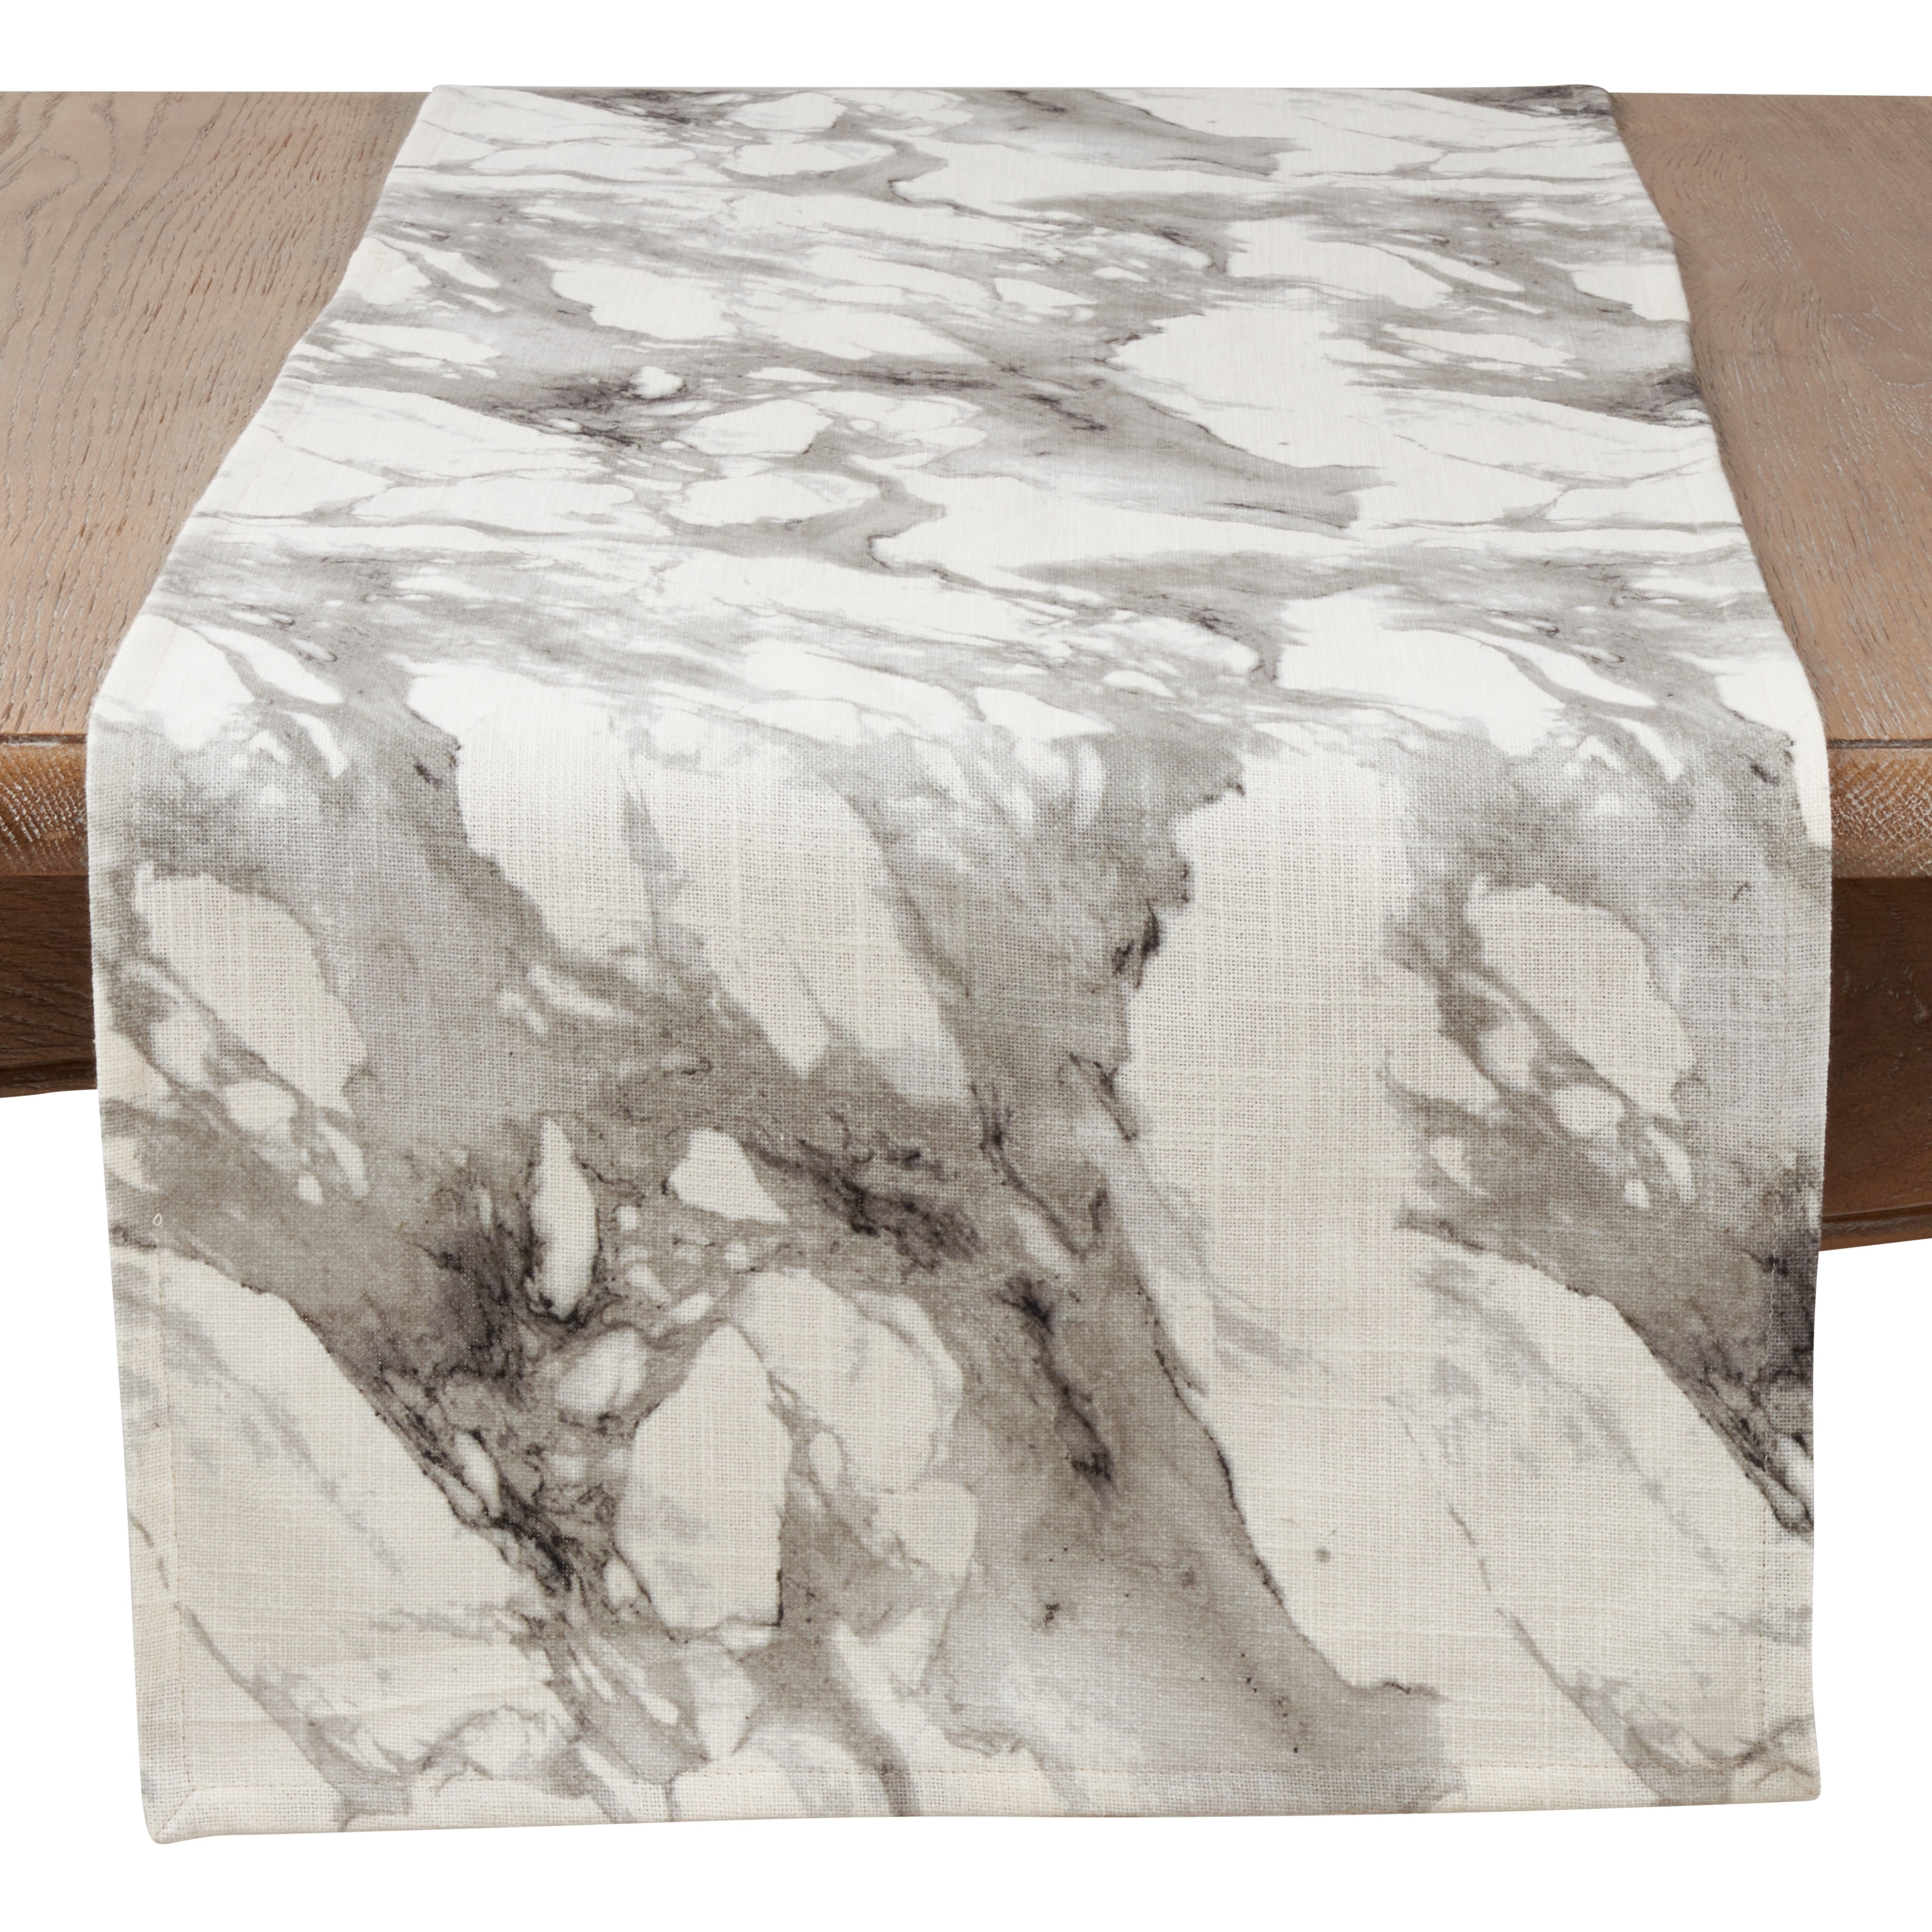 16in x 72in Roostery Tablerunner Abstract Terrazzo Rock Modern Marble Stone Italian Print Cotton Sateen Table Runner 